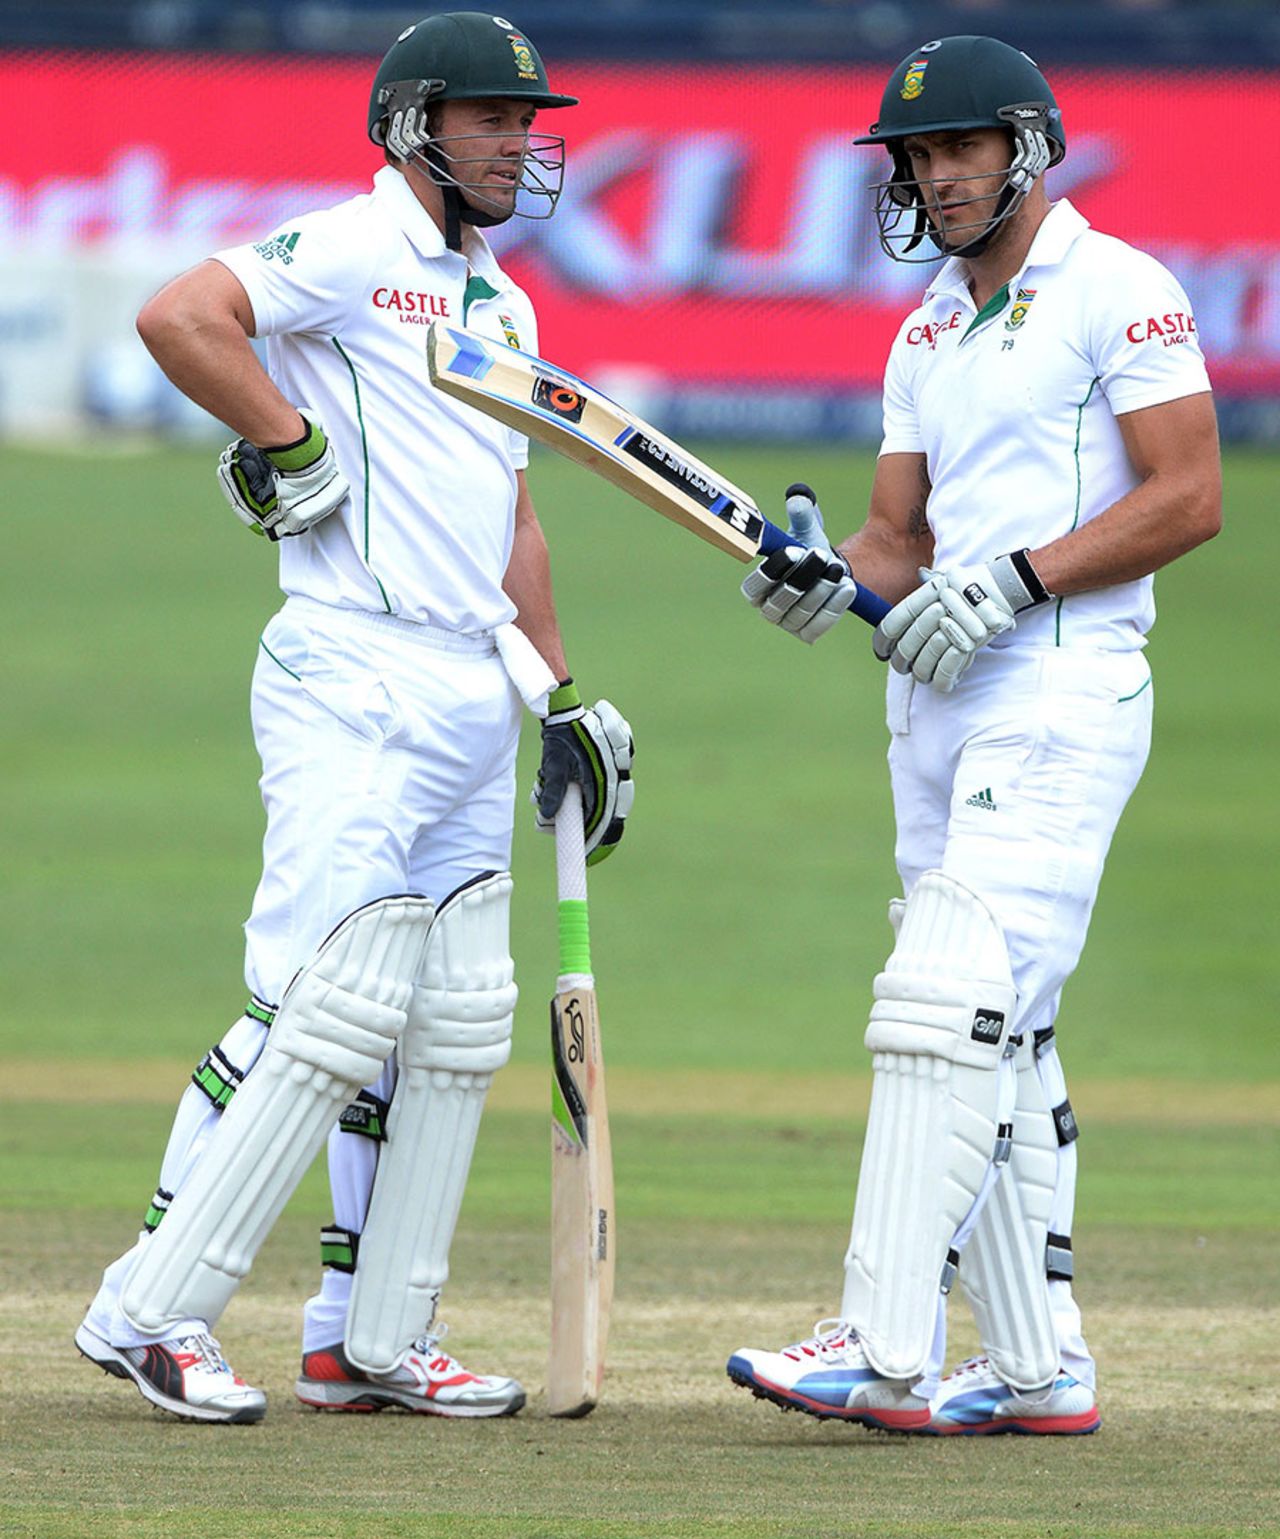 AB de Villiers and Faf du Plessis put on 205 for the fifth wicket, South Africa v India, 1st Test, Johannesburg, 5th day, December 22, 2013